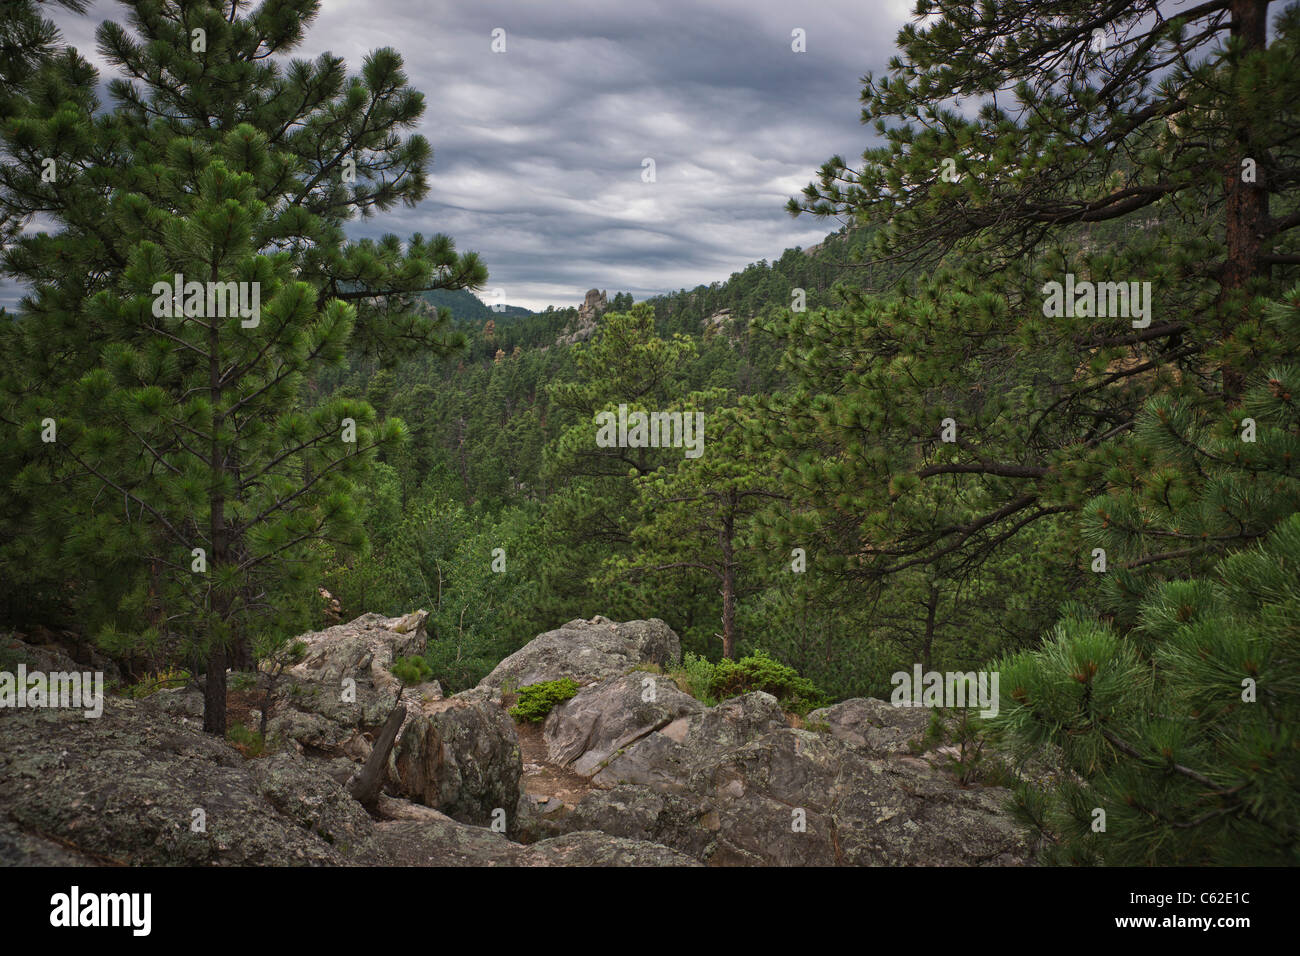 Scenic pine and spruce covered mountains landscape view in Black Hills in South Dakota Stock Photo